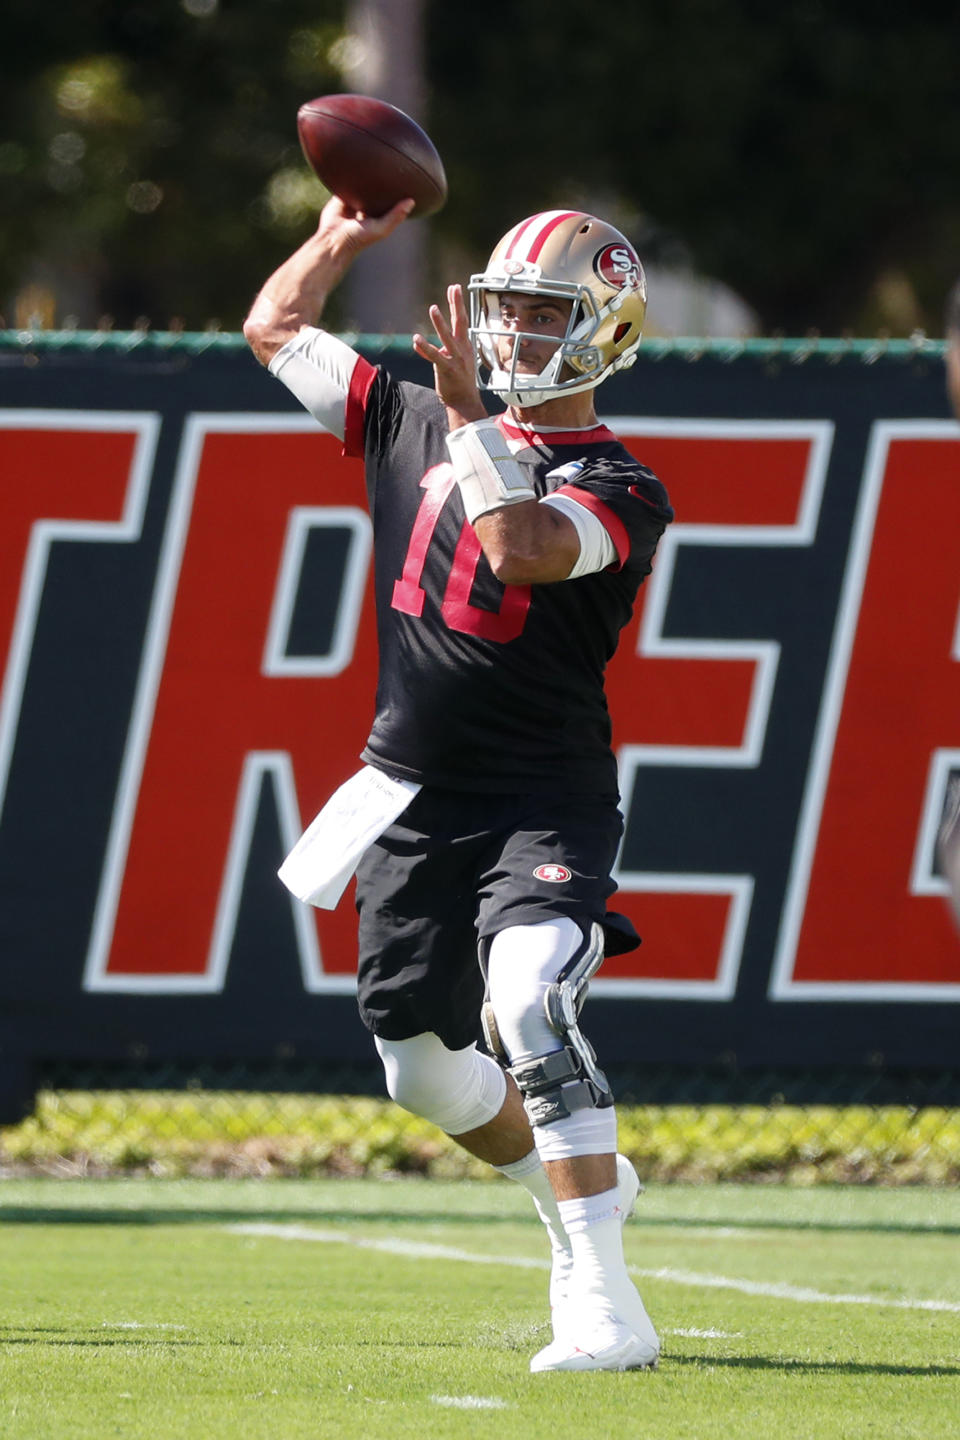 San Francisco 49ers quarterback Jimmy Garoppolo throws as he warms up during practice, Thursday, Jan. 30, 2020, in Coral Gables, Fla., for the NFL Super Bowl 54 football game. (AP Photo/Wilfredo Lee)